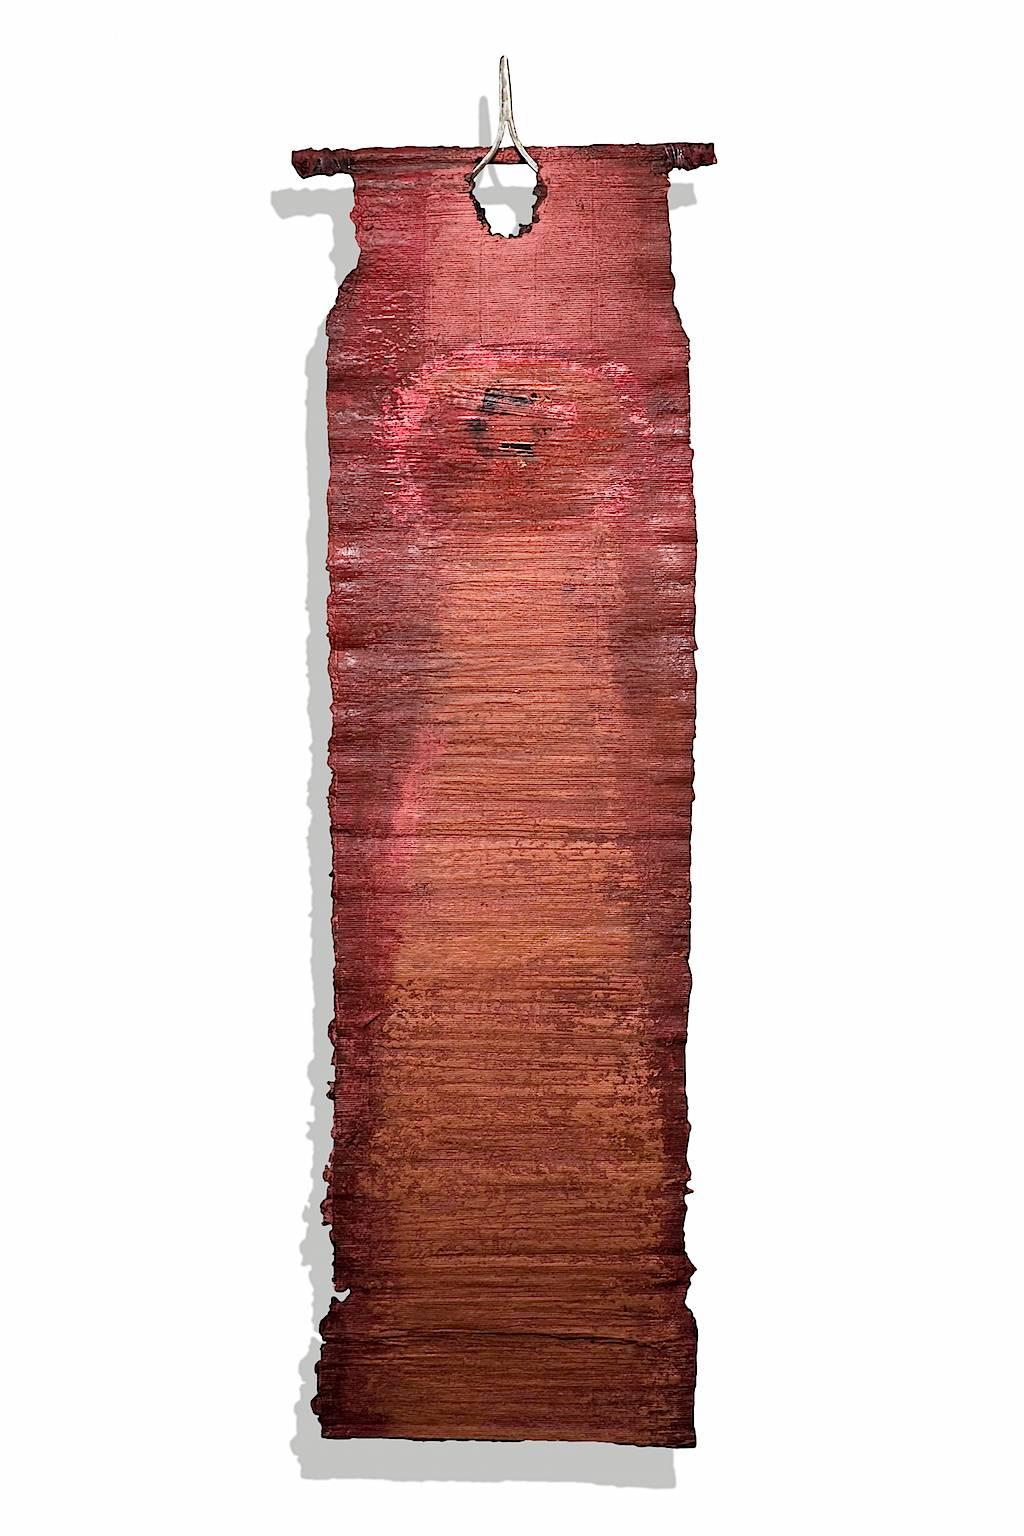 "Fading Out, Fading In" Abstract, Handmade Paper Wall Hanging Sculpture